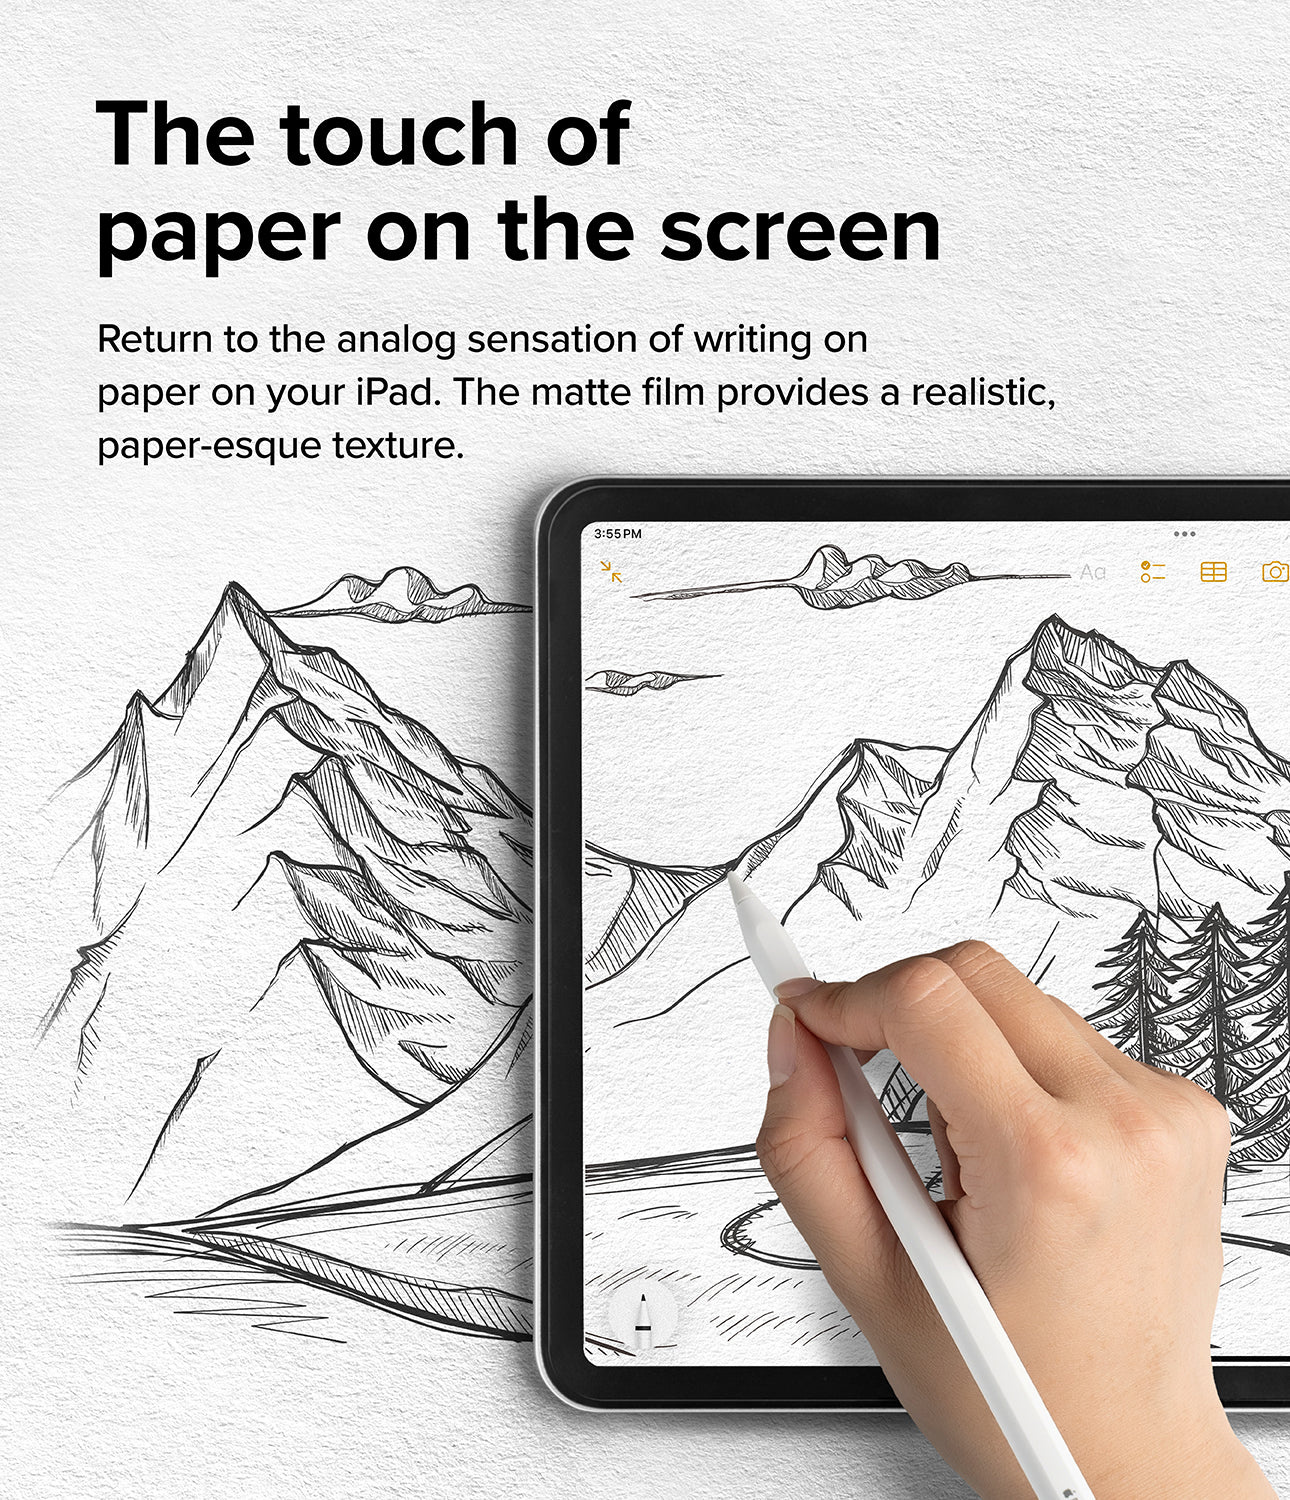 iPad Pro 13" (M4) Screen Protector | Paper Touch Film - Soft - The touch of paper on the screen. Return to the analog sensation of writing on paper on your iPad. The matte film provides a realistic, paper-esque texture.